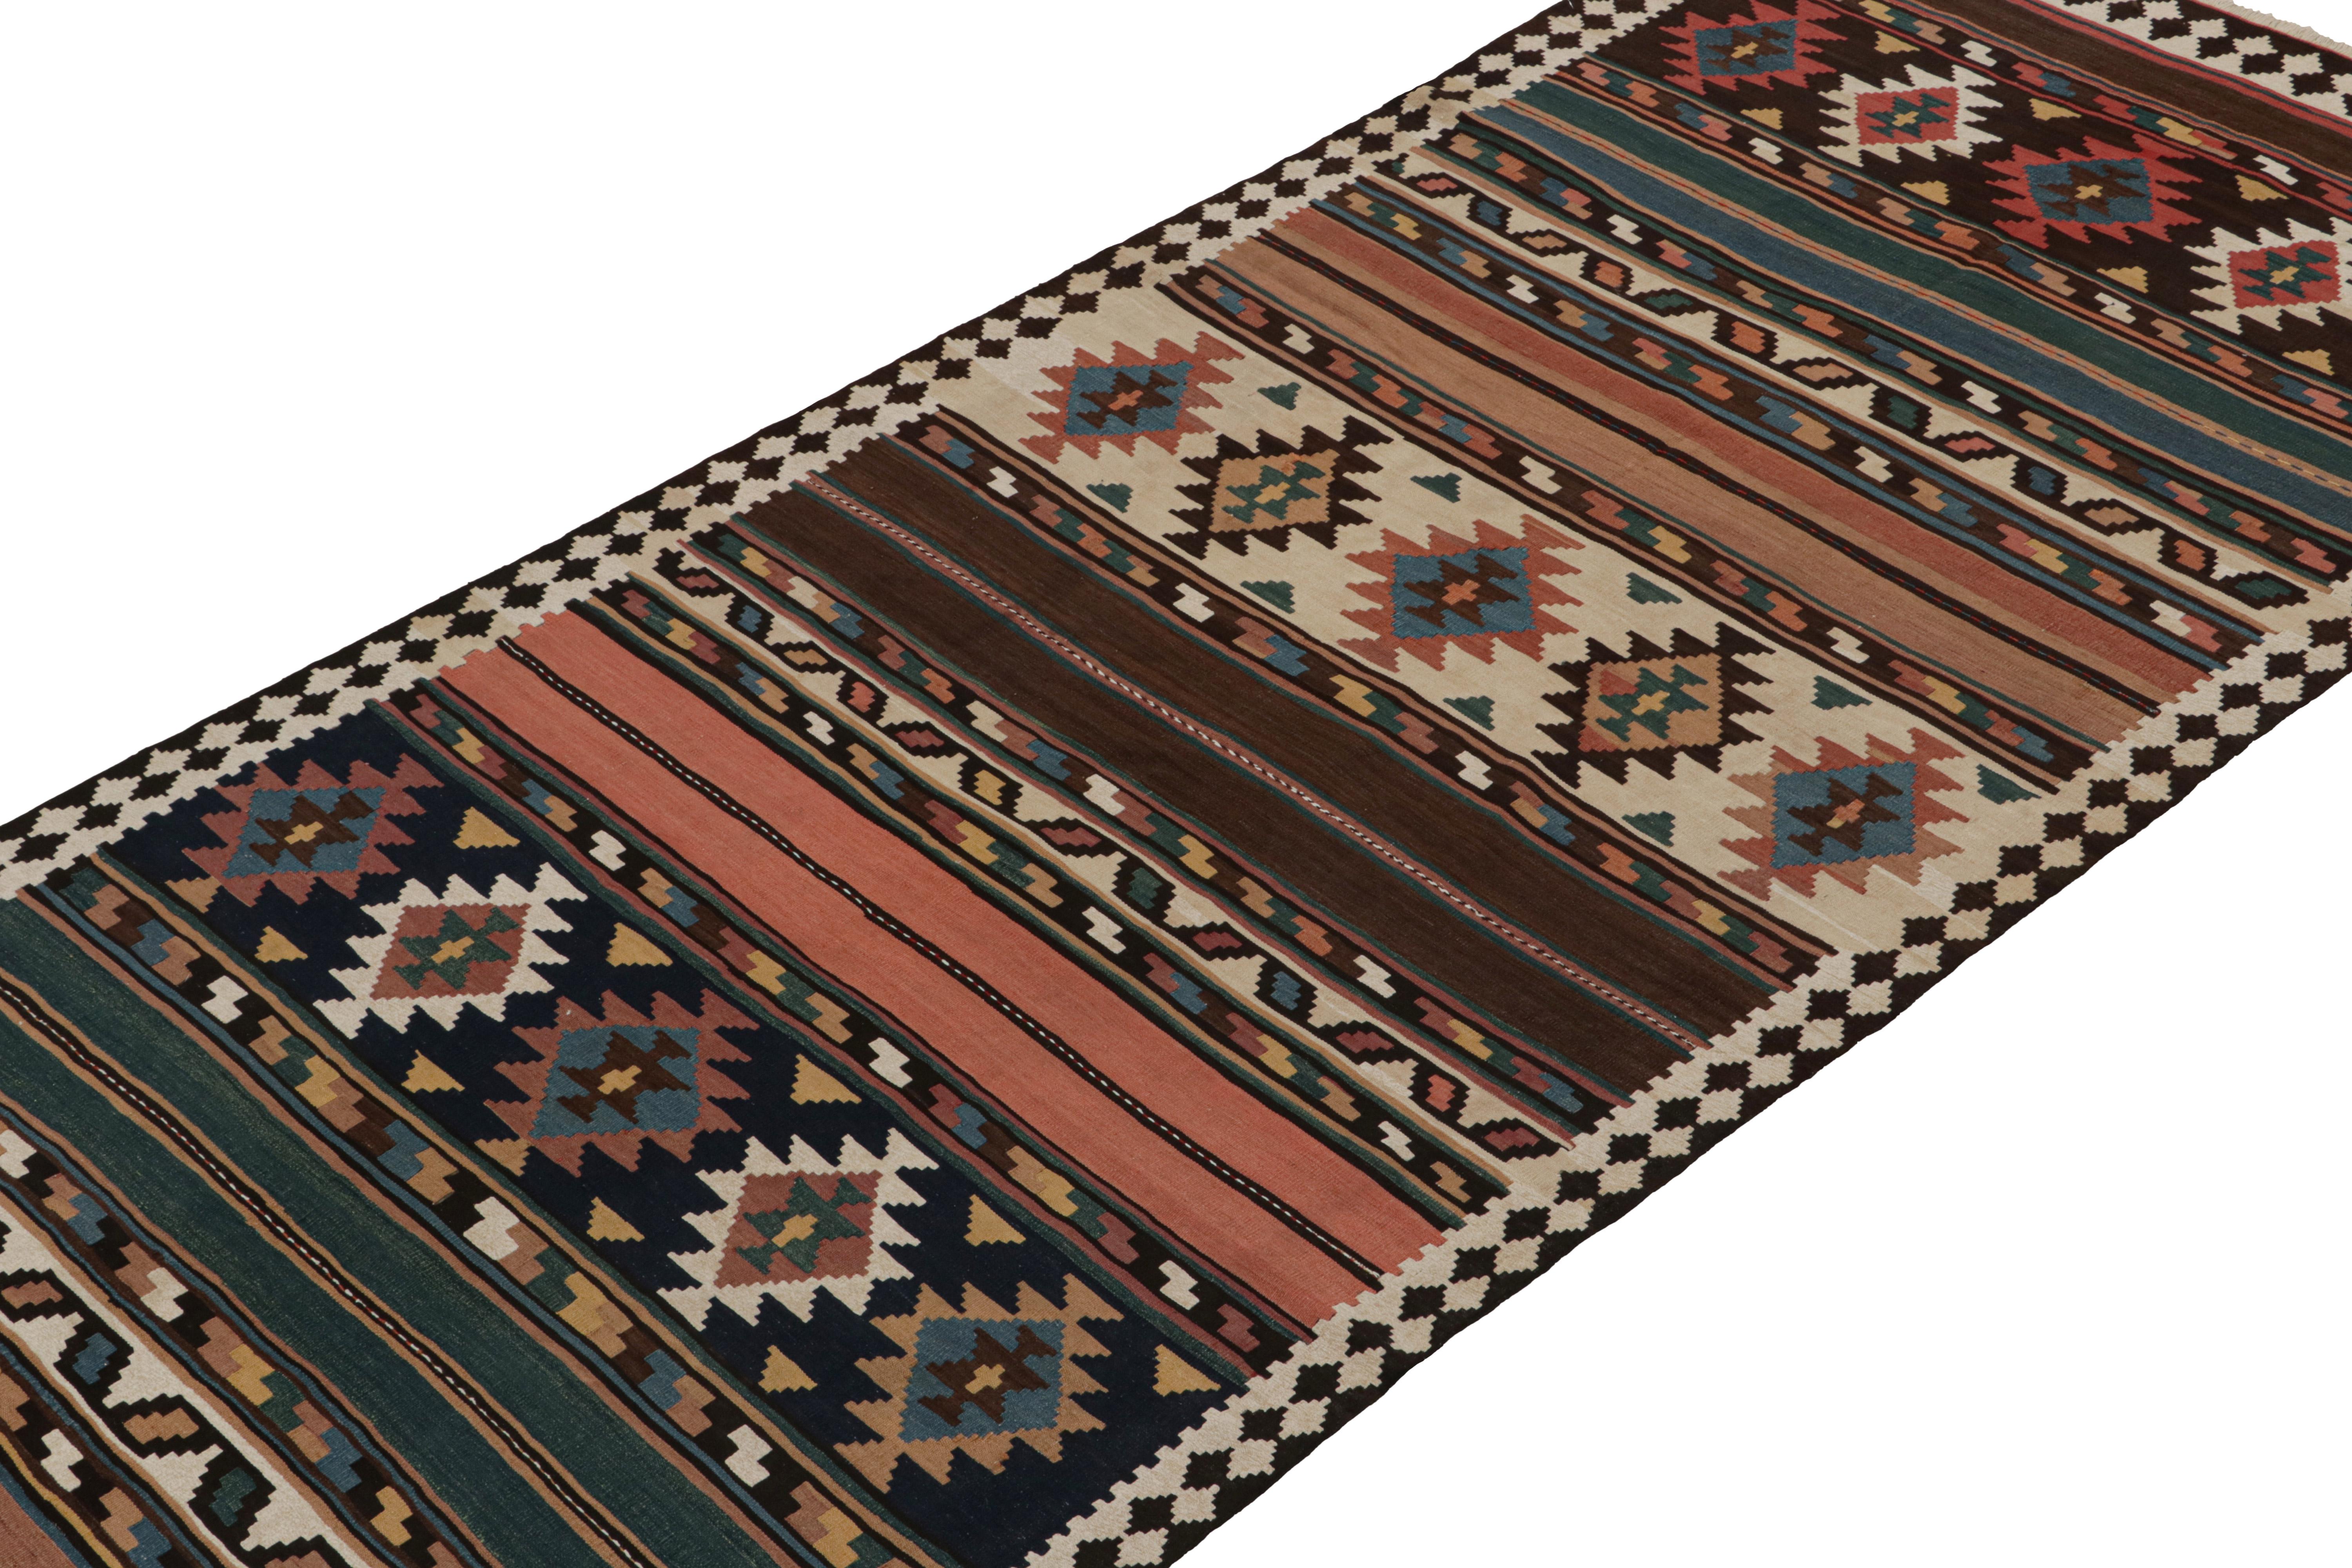 This vintage 5x11 Persian Kilim is believed to be a Bidjar tribal rug, handwoven in wool circa 1950-1960. 

On the Design:

Its design favors a complementary play of traditional geometric patterns & stripes in rich colors. Keen eyes will note an